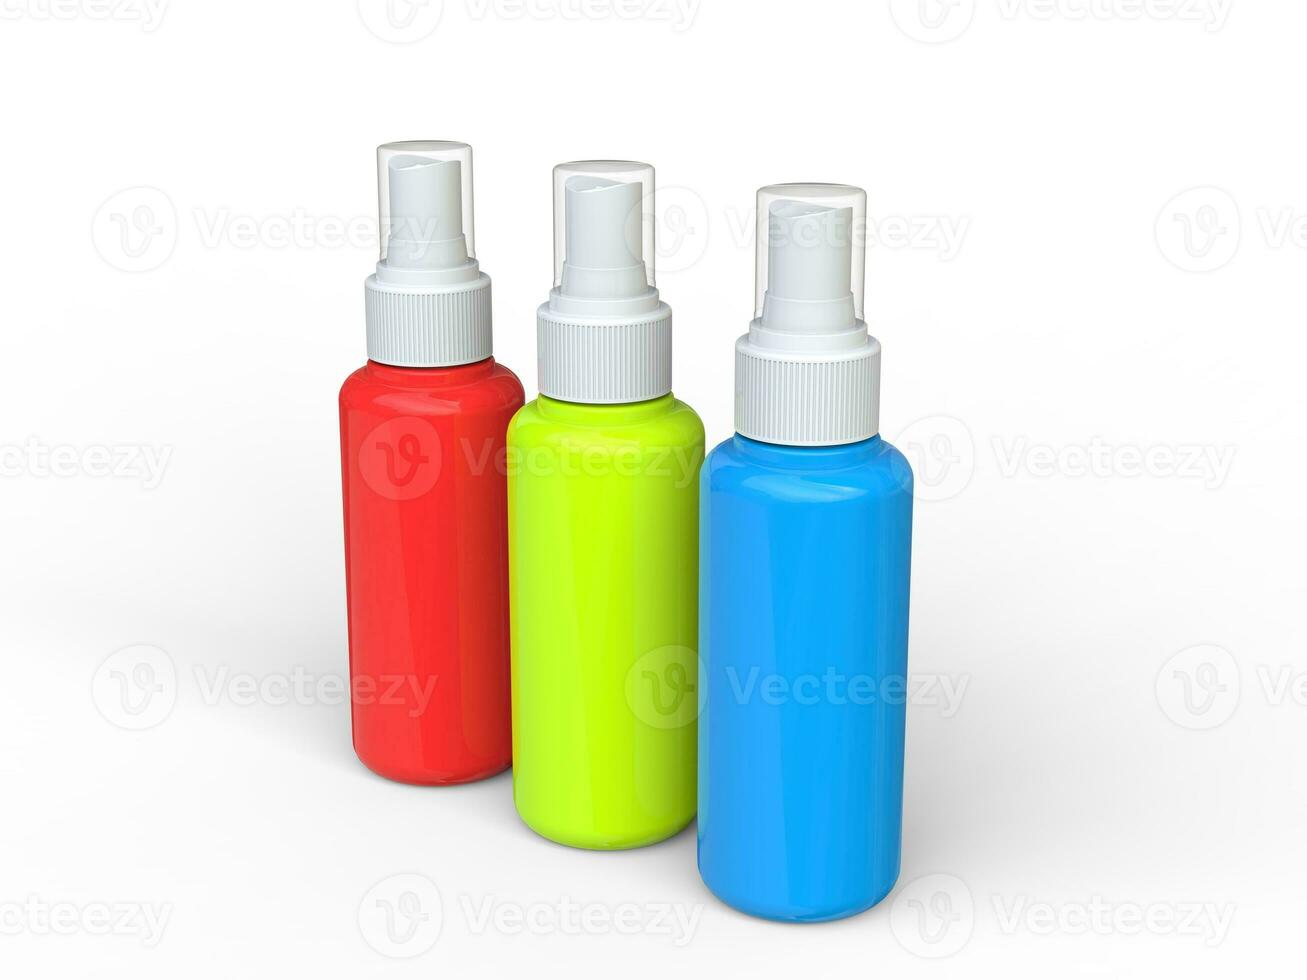 Red, green and blue unlabled spray bottles - top view photo